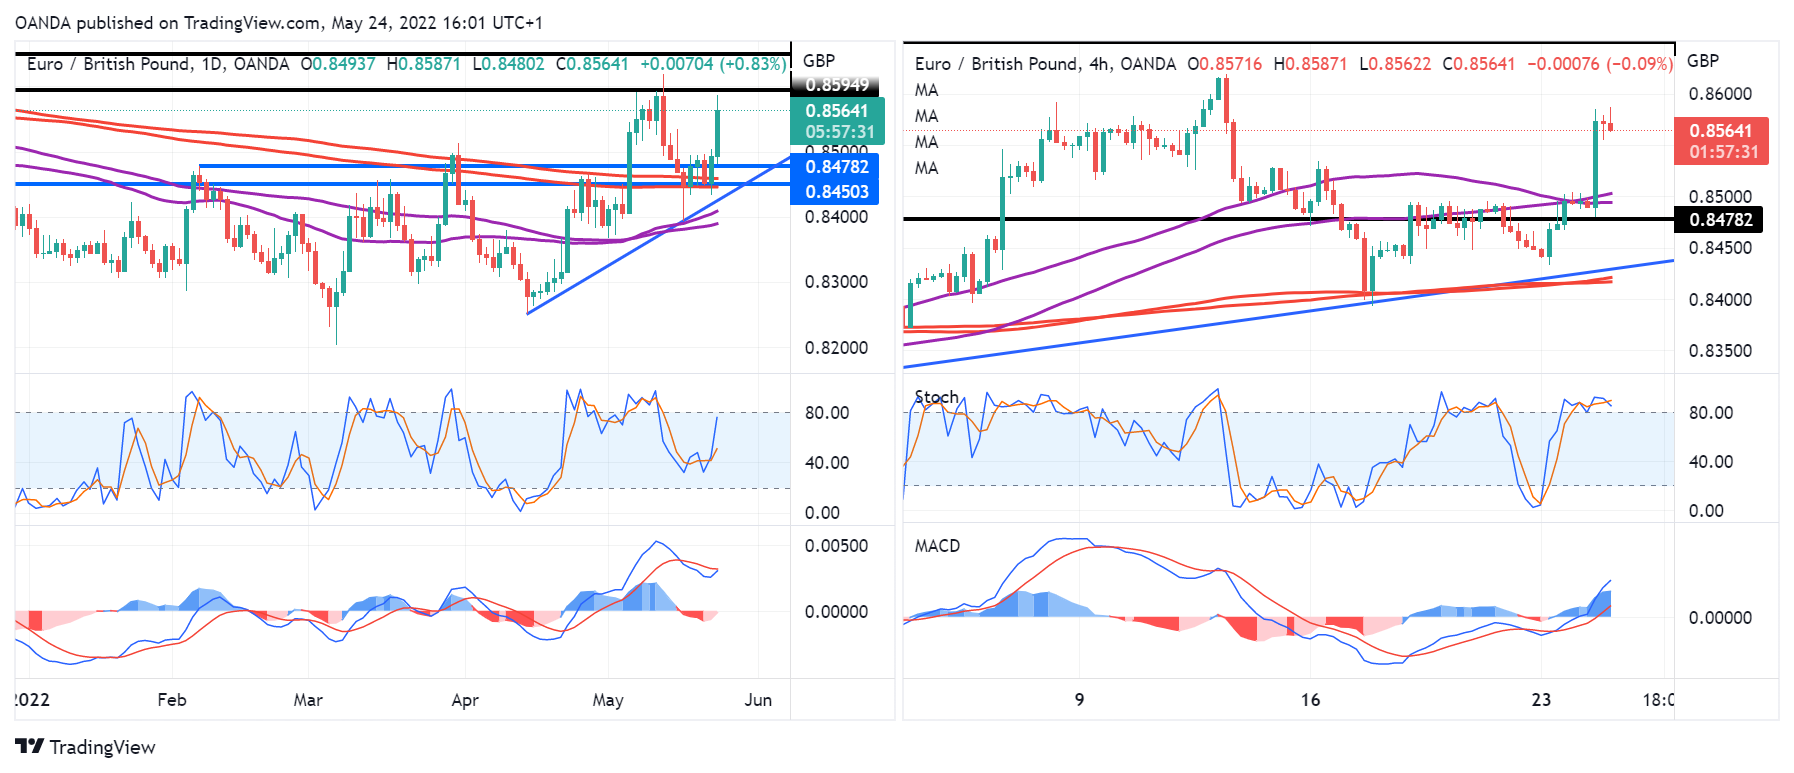 EUR/GBP Daily, 4-Hour Charts